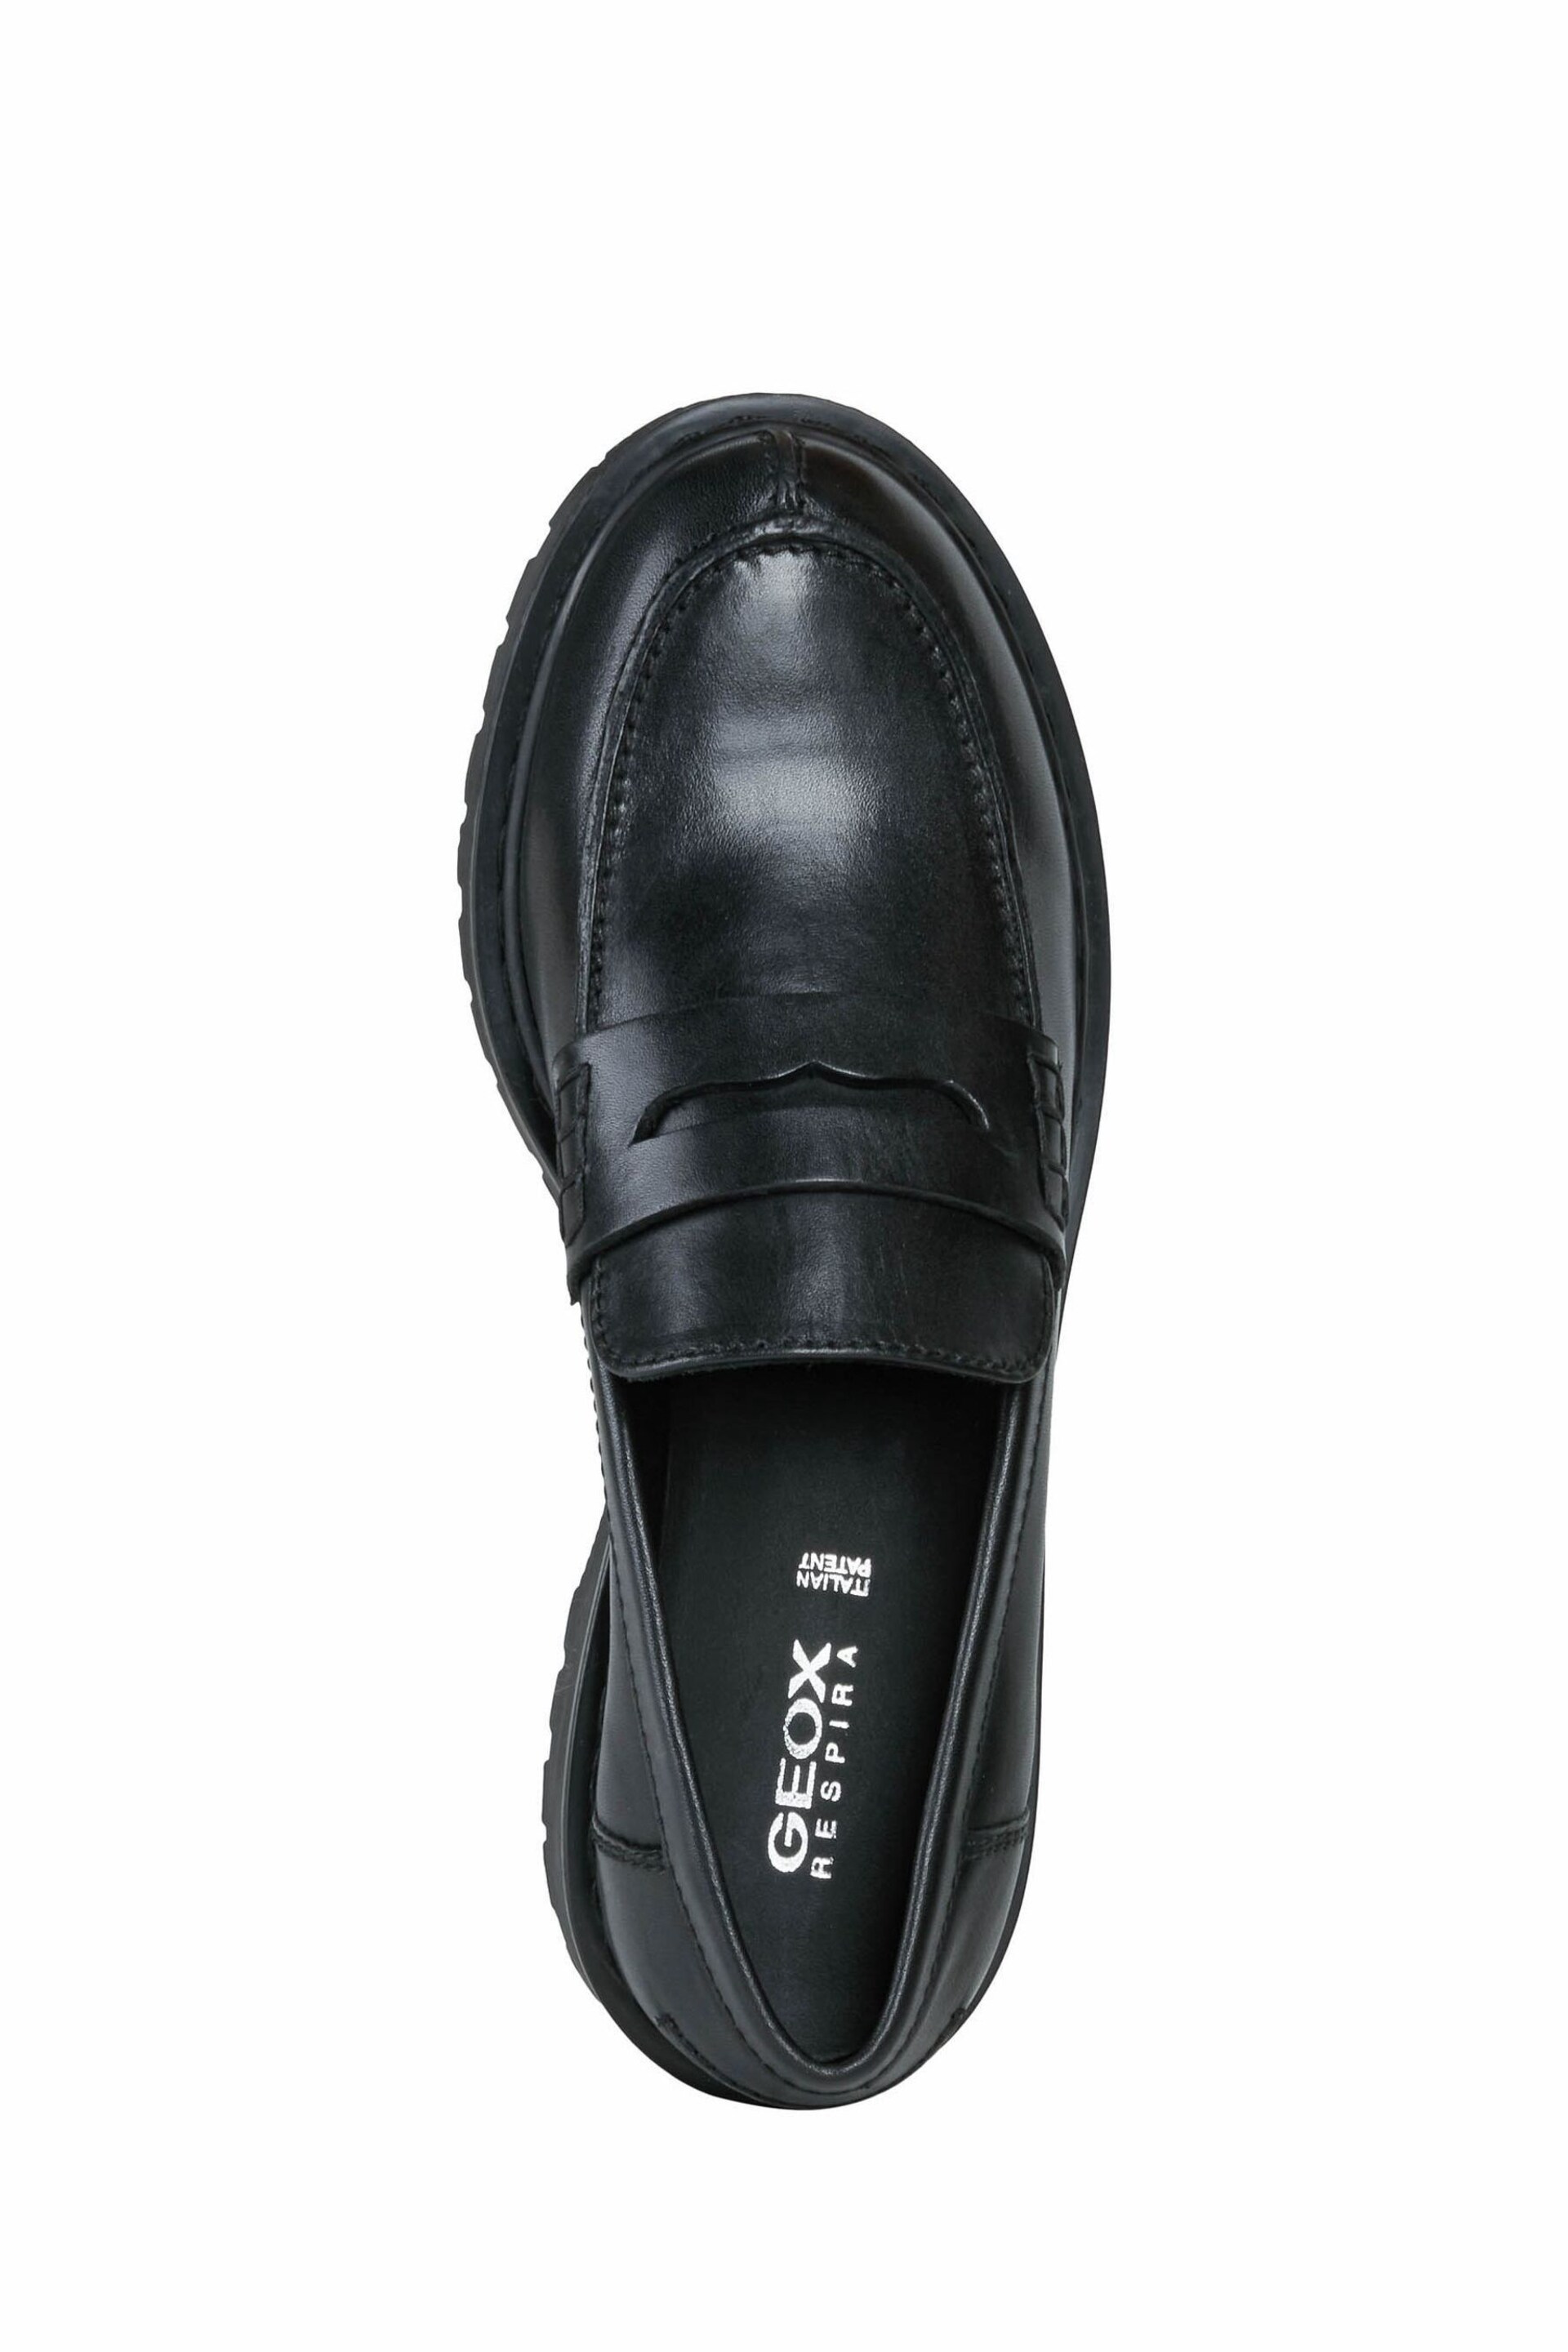 Geox Womens Bleyze Black Shoes - Image 5 of 6